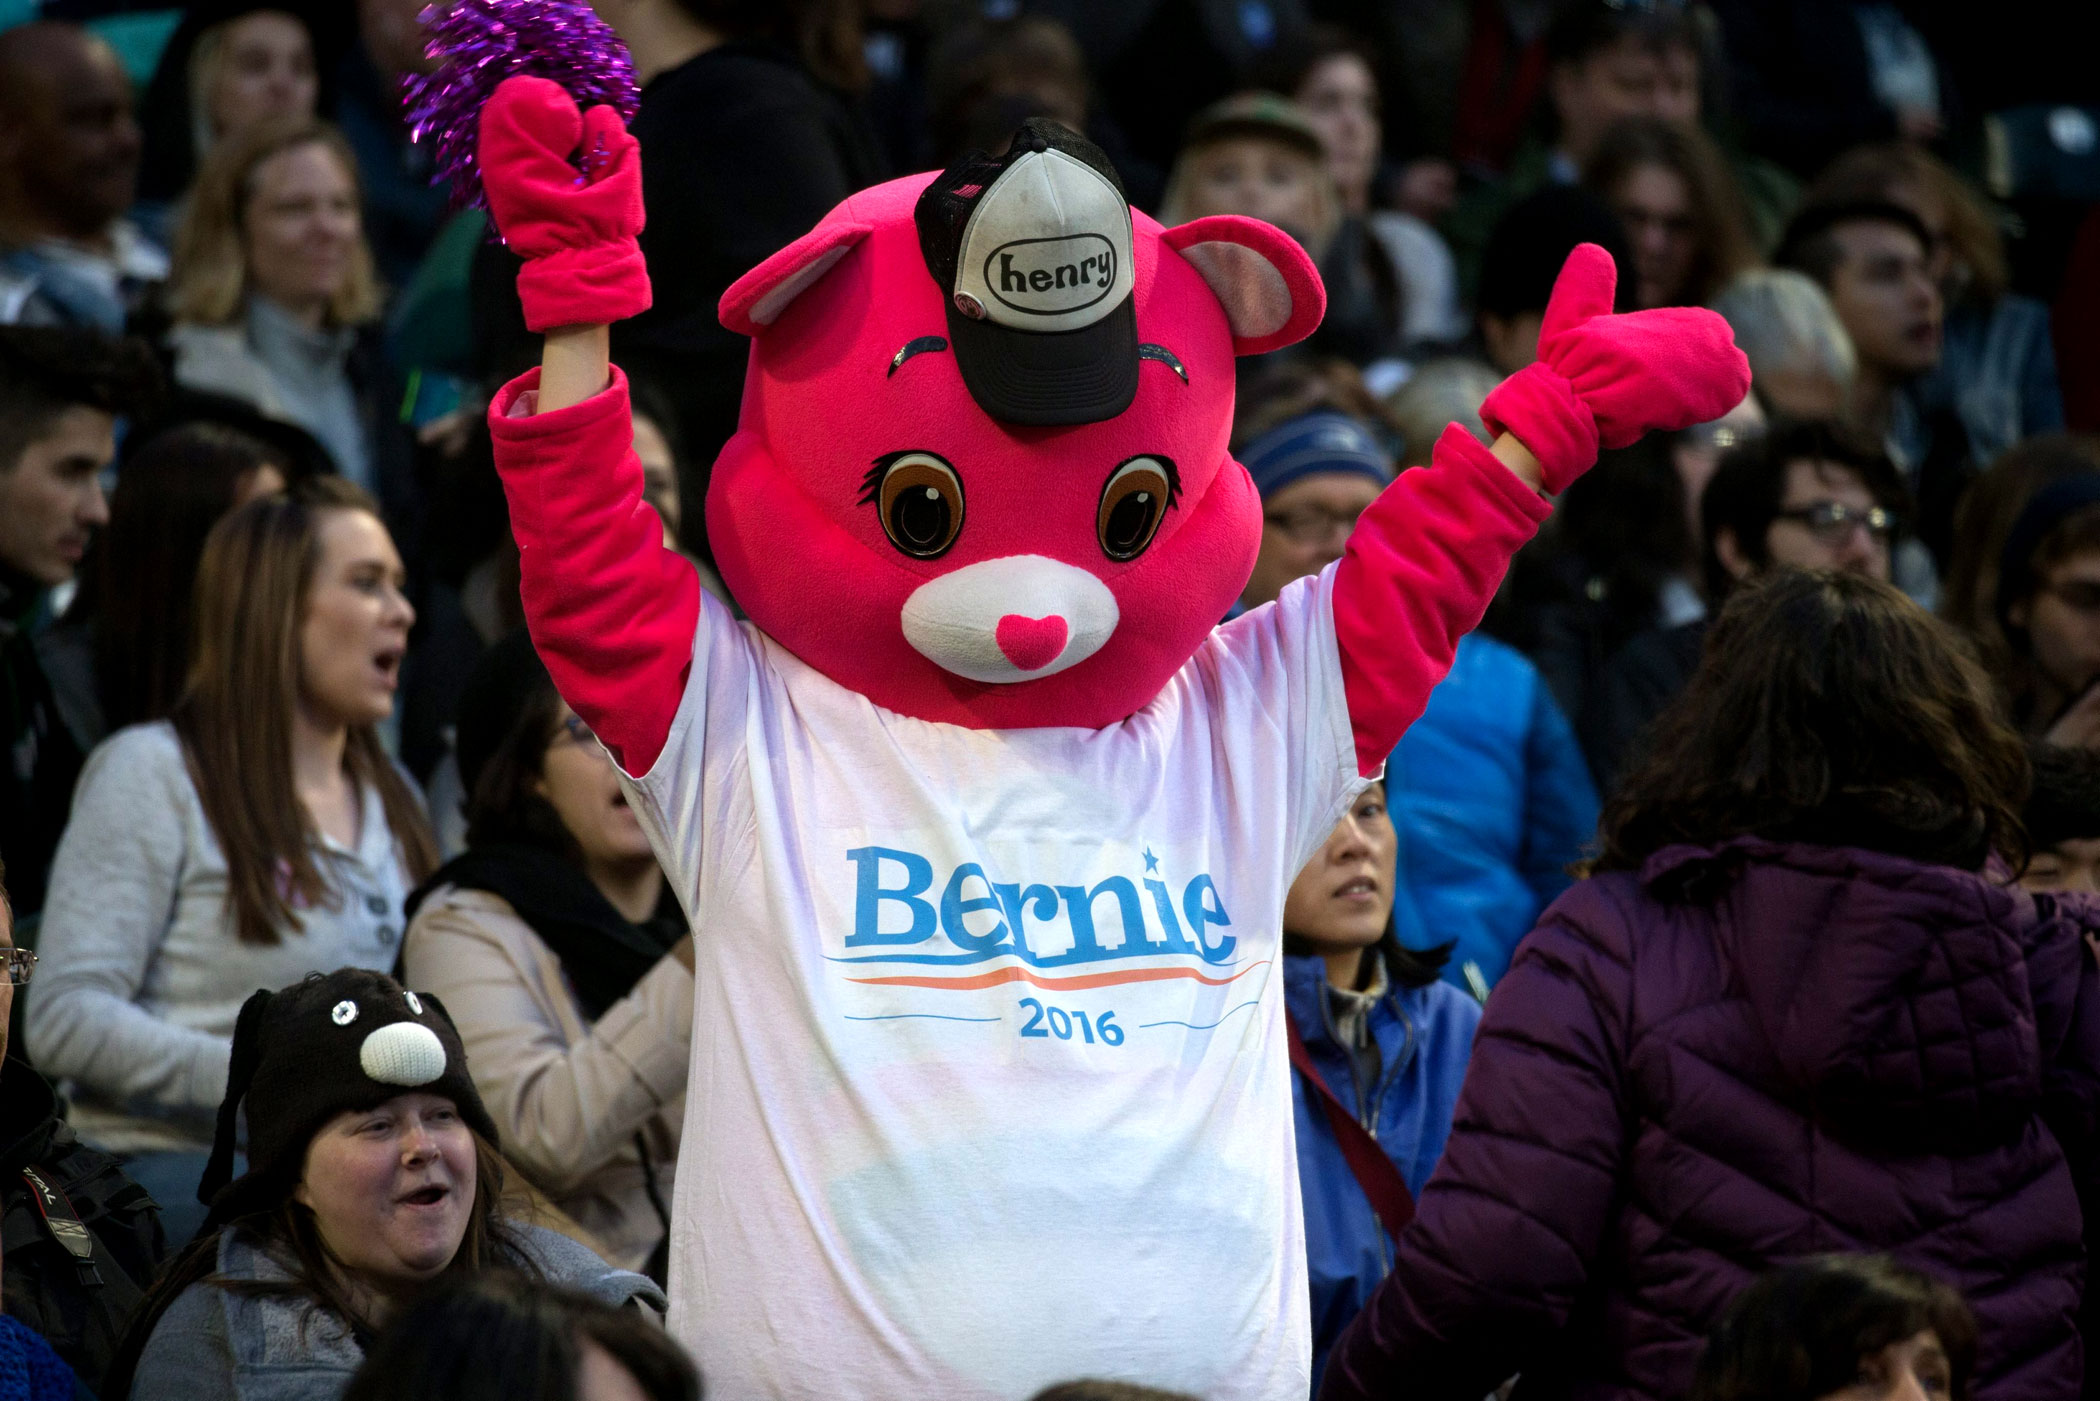 A person dressed as a Care Bear cheers during a campaign rally for Democratic presidential candidate, Vermont Sen. Bernie Sanders in Seattle, on March 25, 2016.